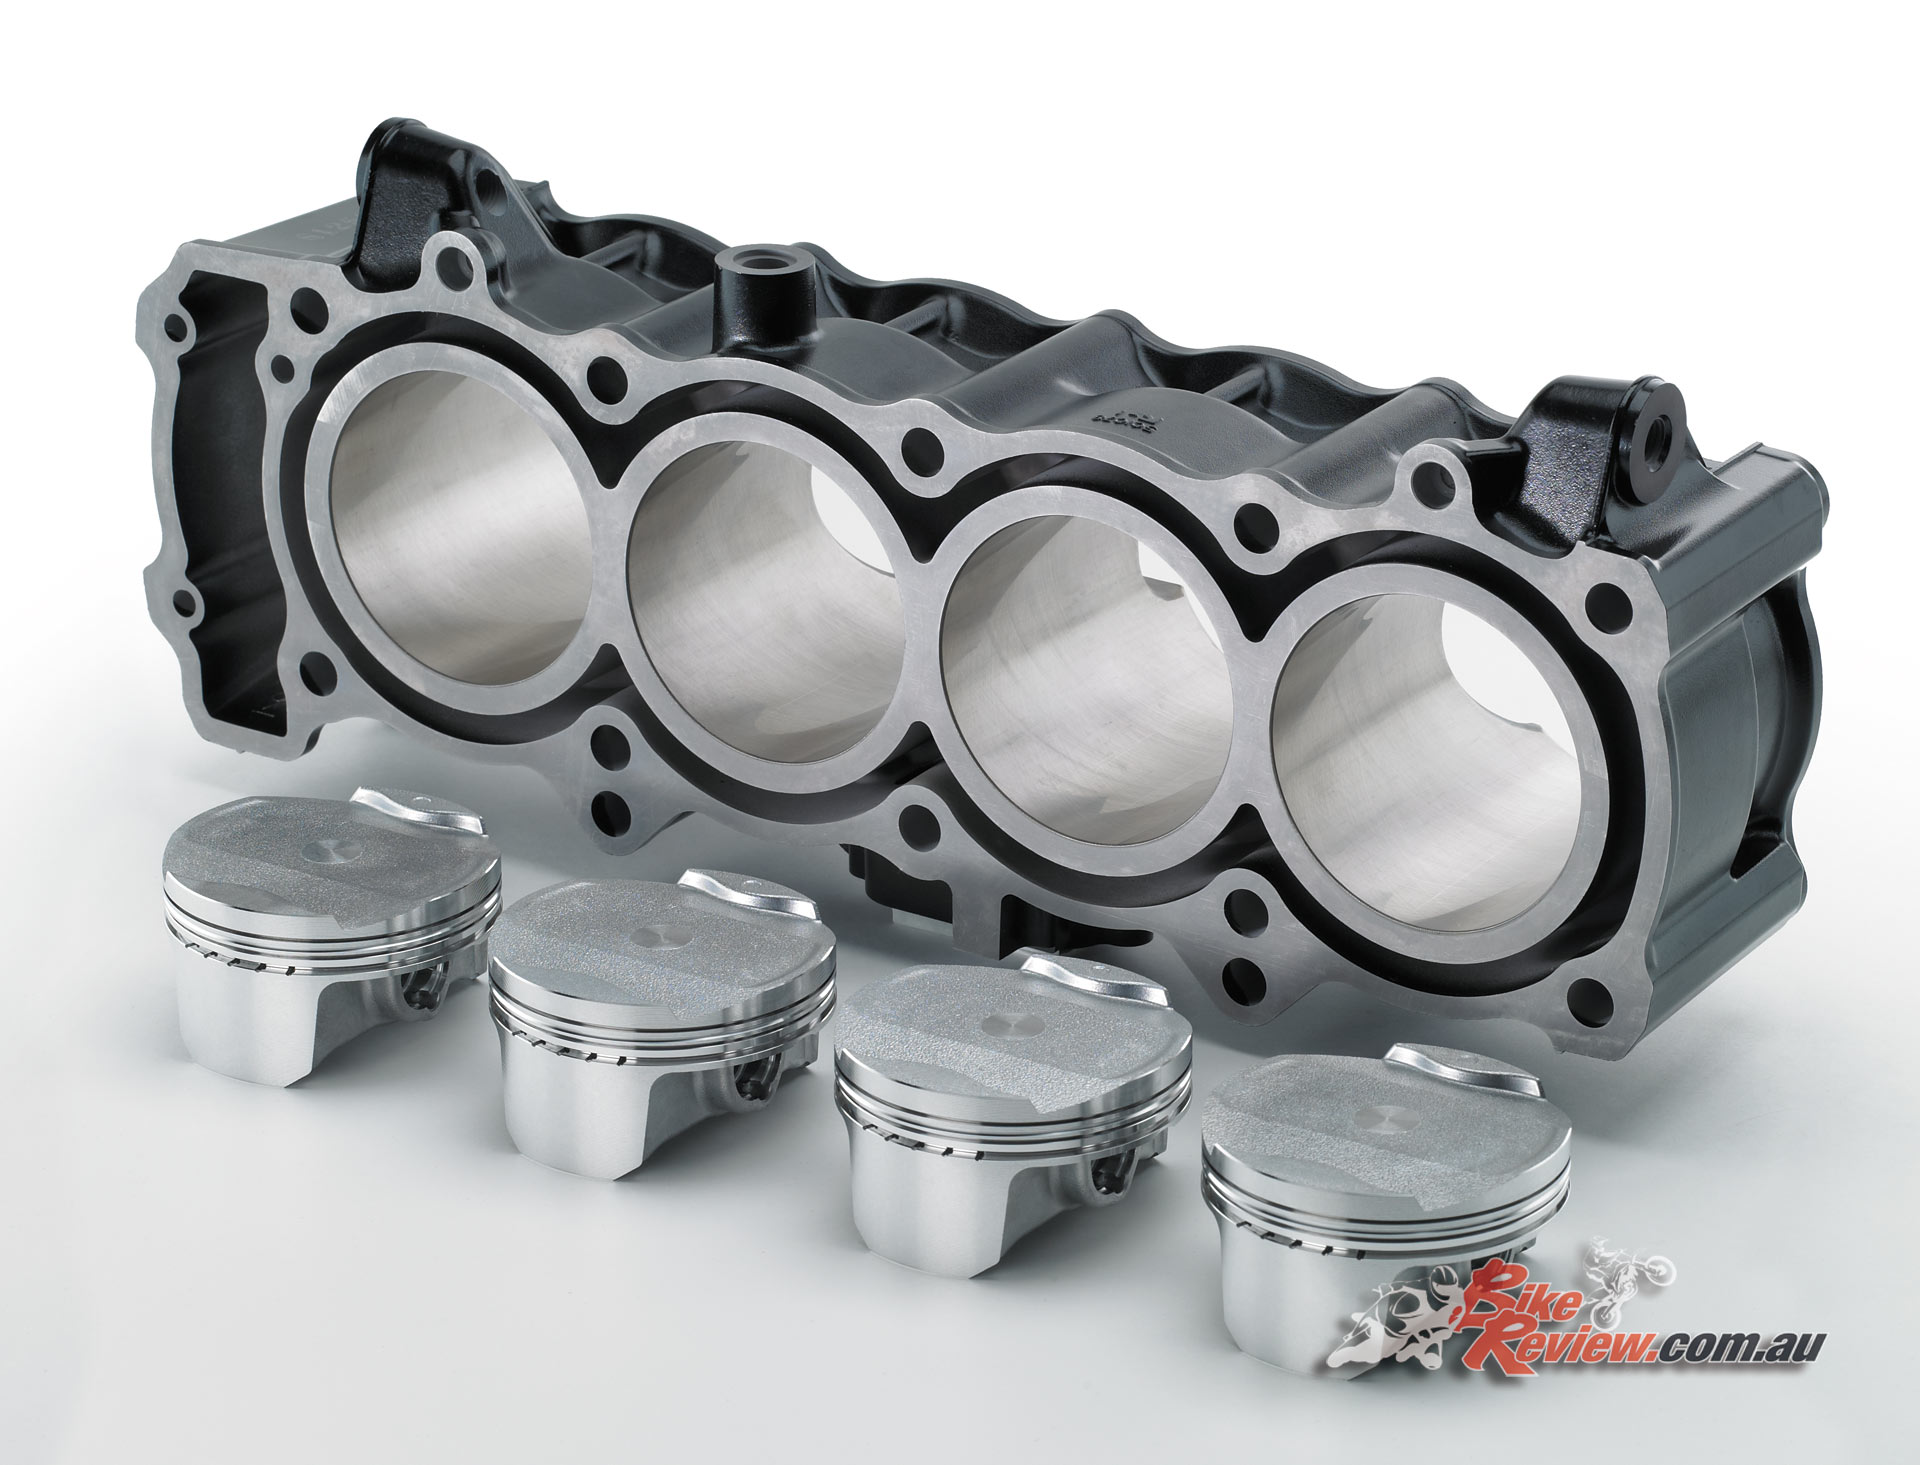 Bore x stroke is 73.4 x 56mm. The pistons are formed using the same cast method that the H2 pistons are made using, enabling similar weight to forged pistons. 